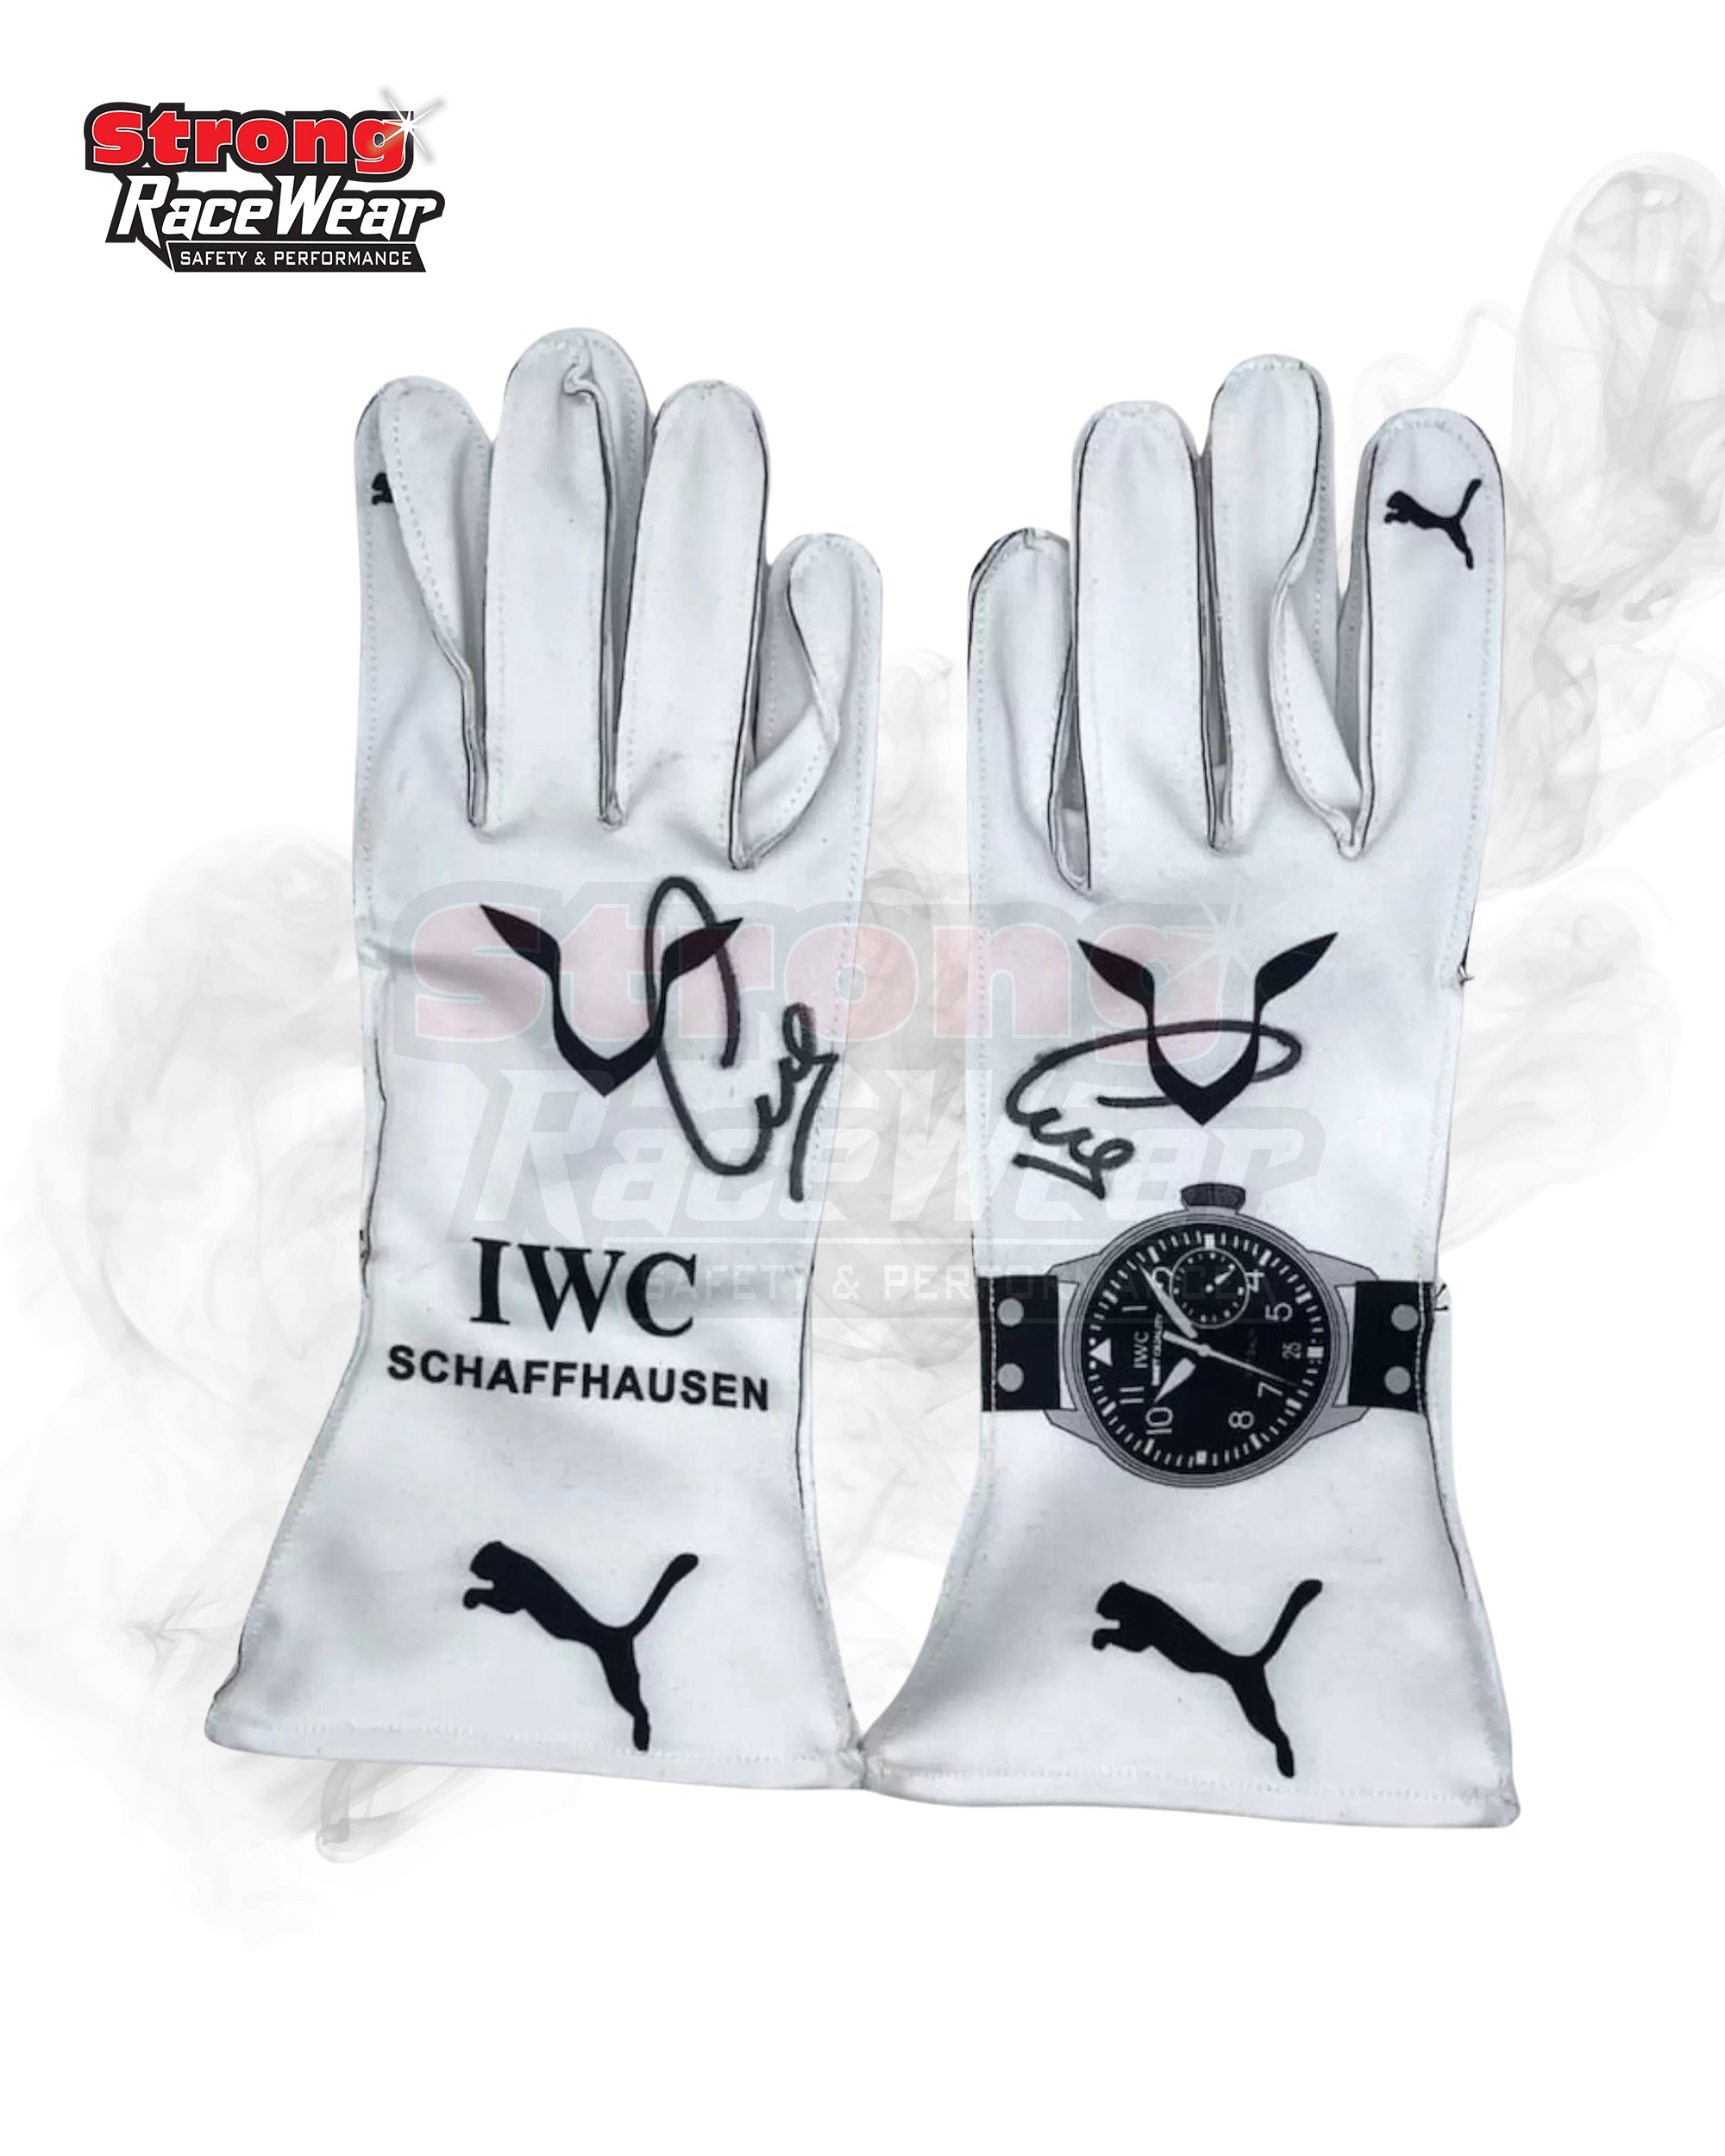 Products Lewis Hamilton Mercedes F1 Replica Gloves